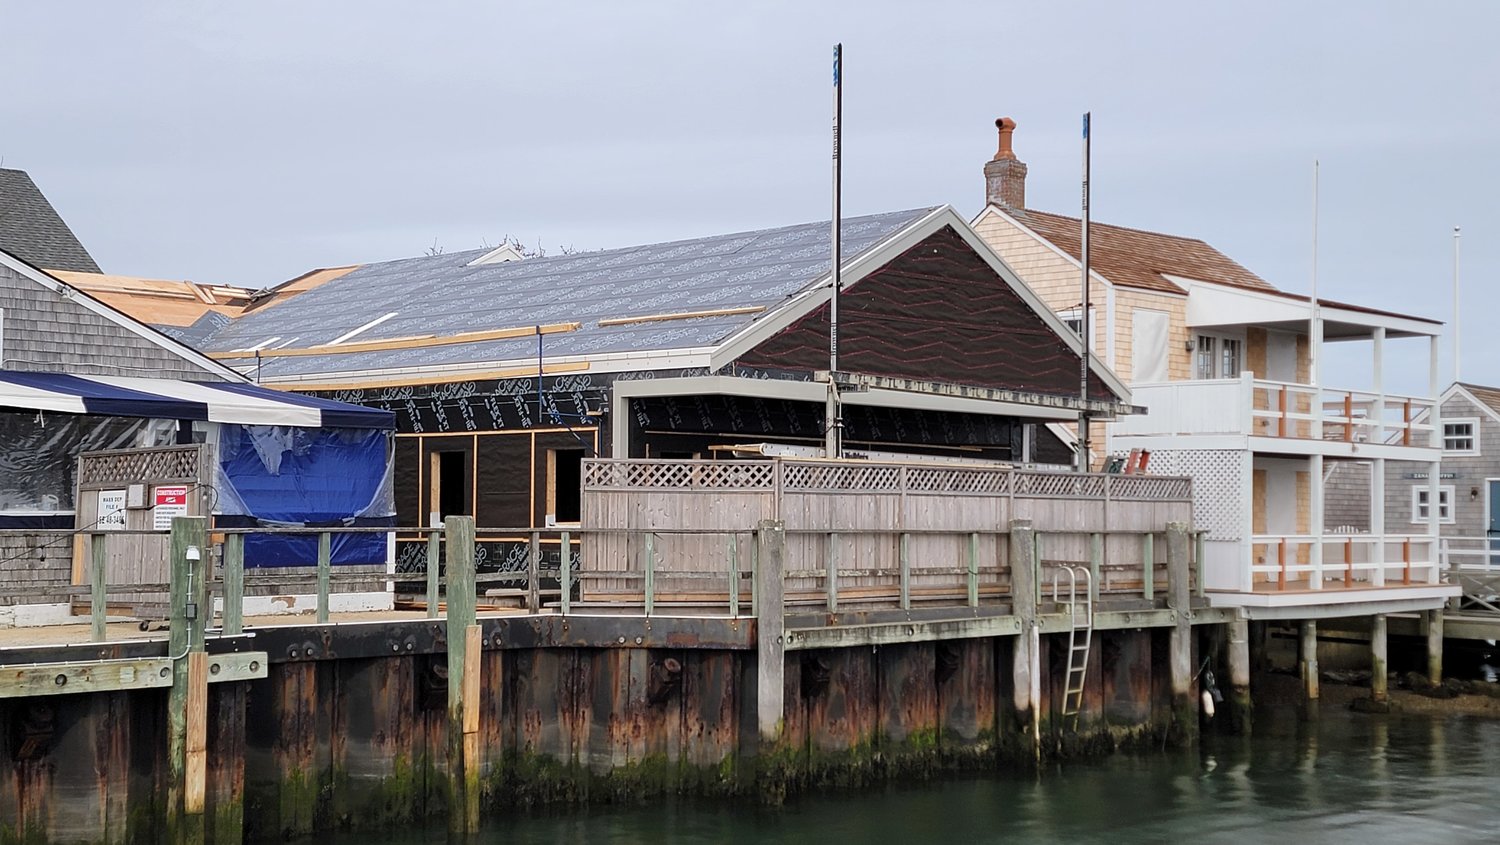 Major renovation work is ongoing at the former Straight Wharf Fish Store and Starz Ice Cream on Straight Wharf in preparation for its conversion into a casual-dining clam shack overlooking the water.